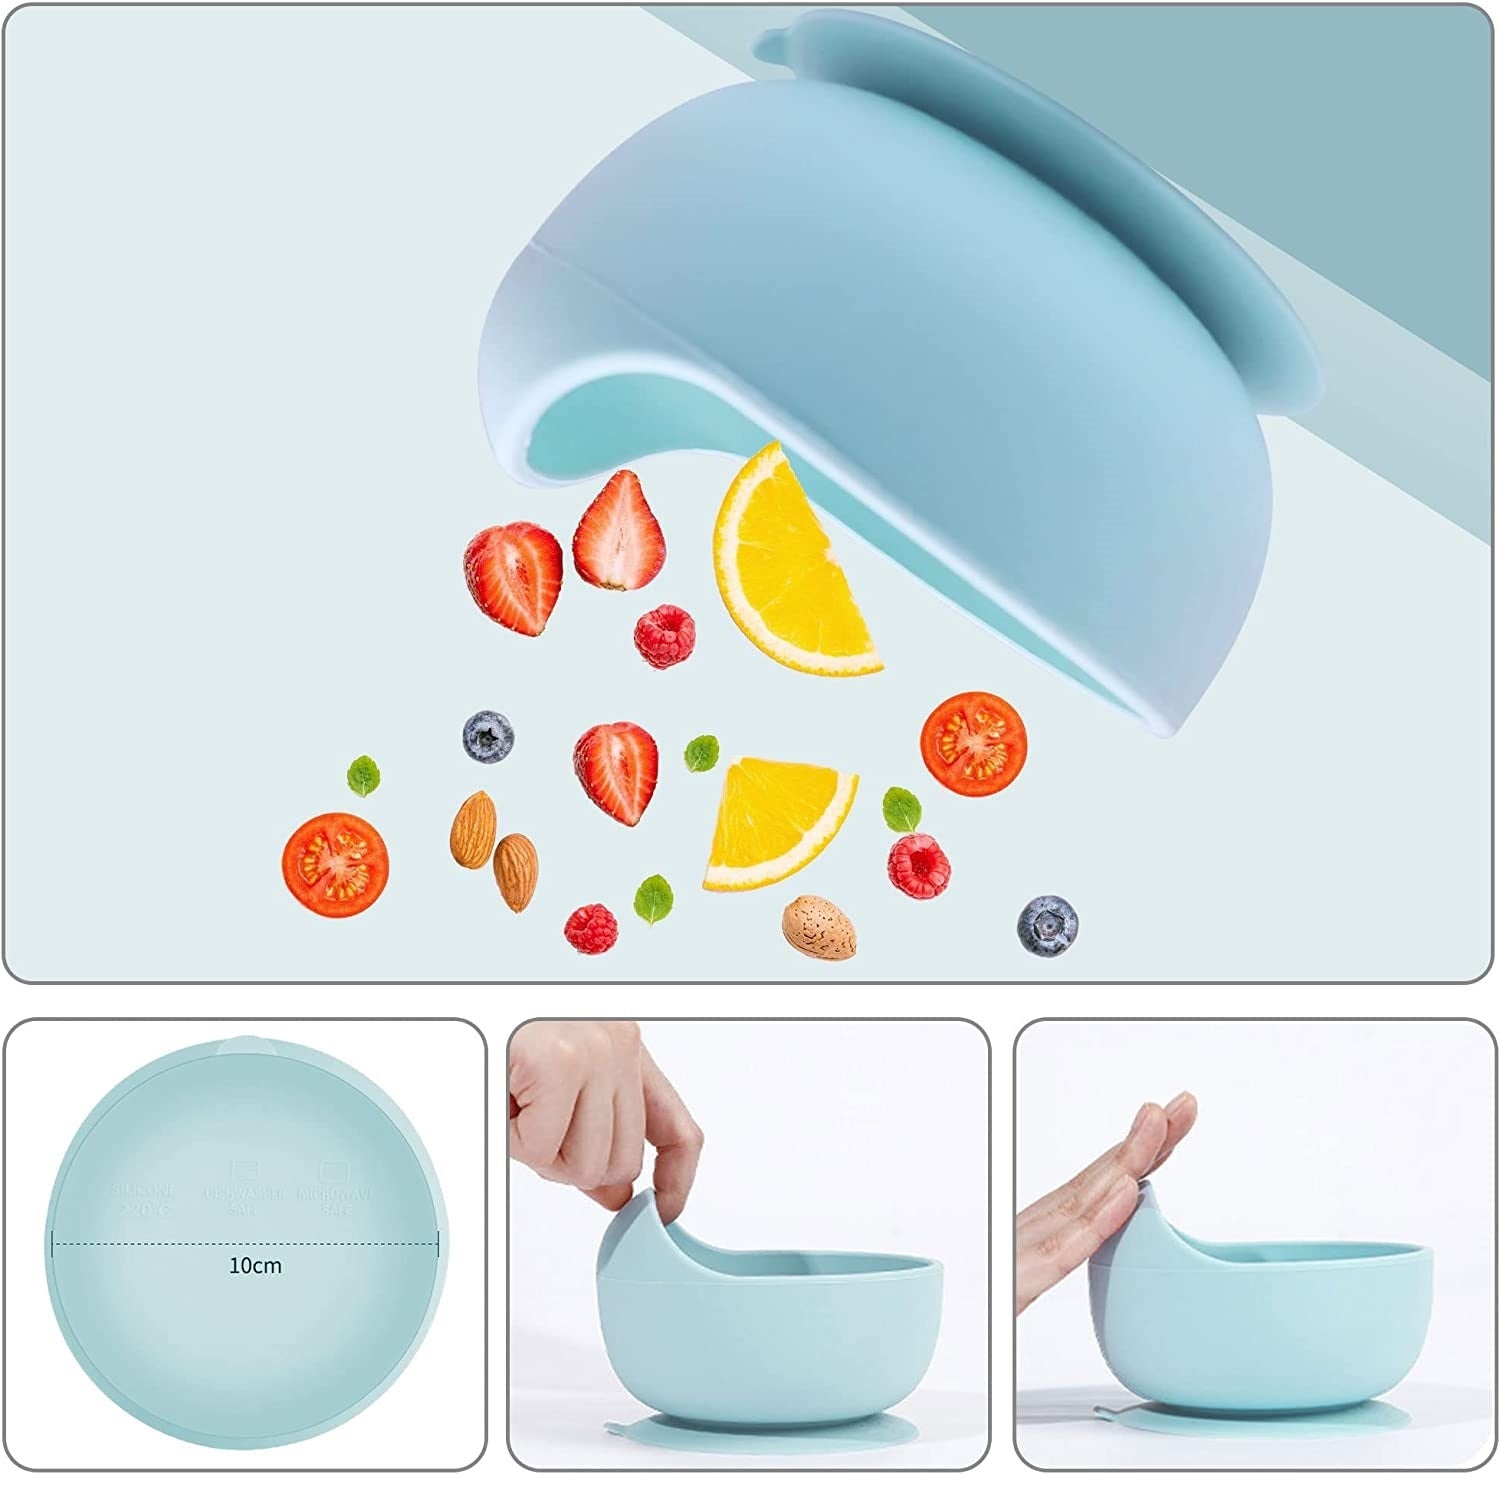 Silicone Suction Cup Bowl with Spoon 100110755